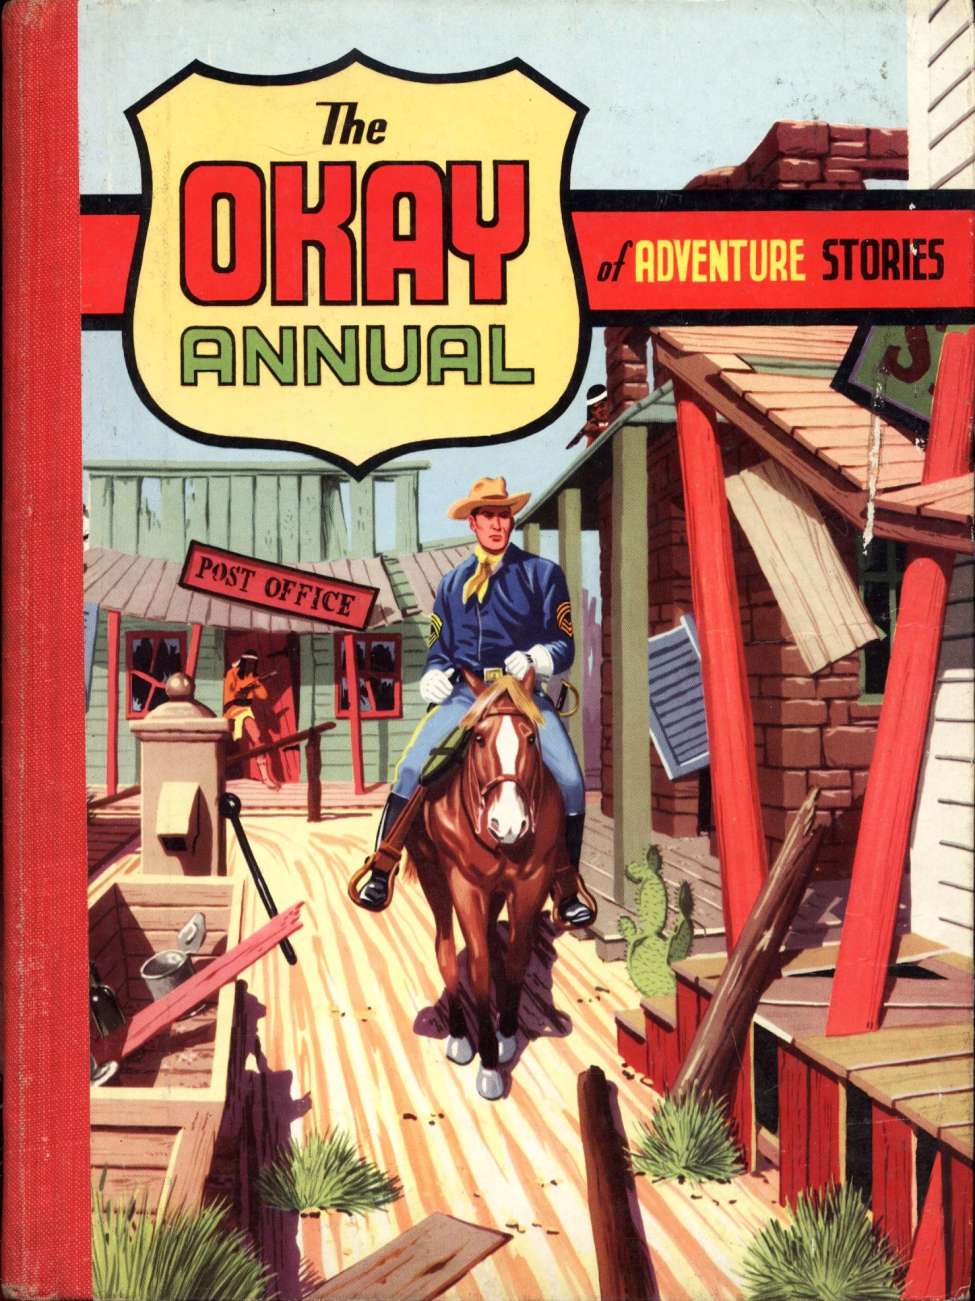 Book Cover For Okay Annual of Adventure Stories 2